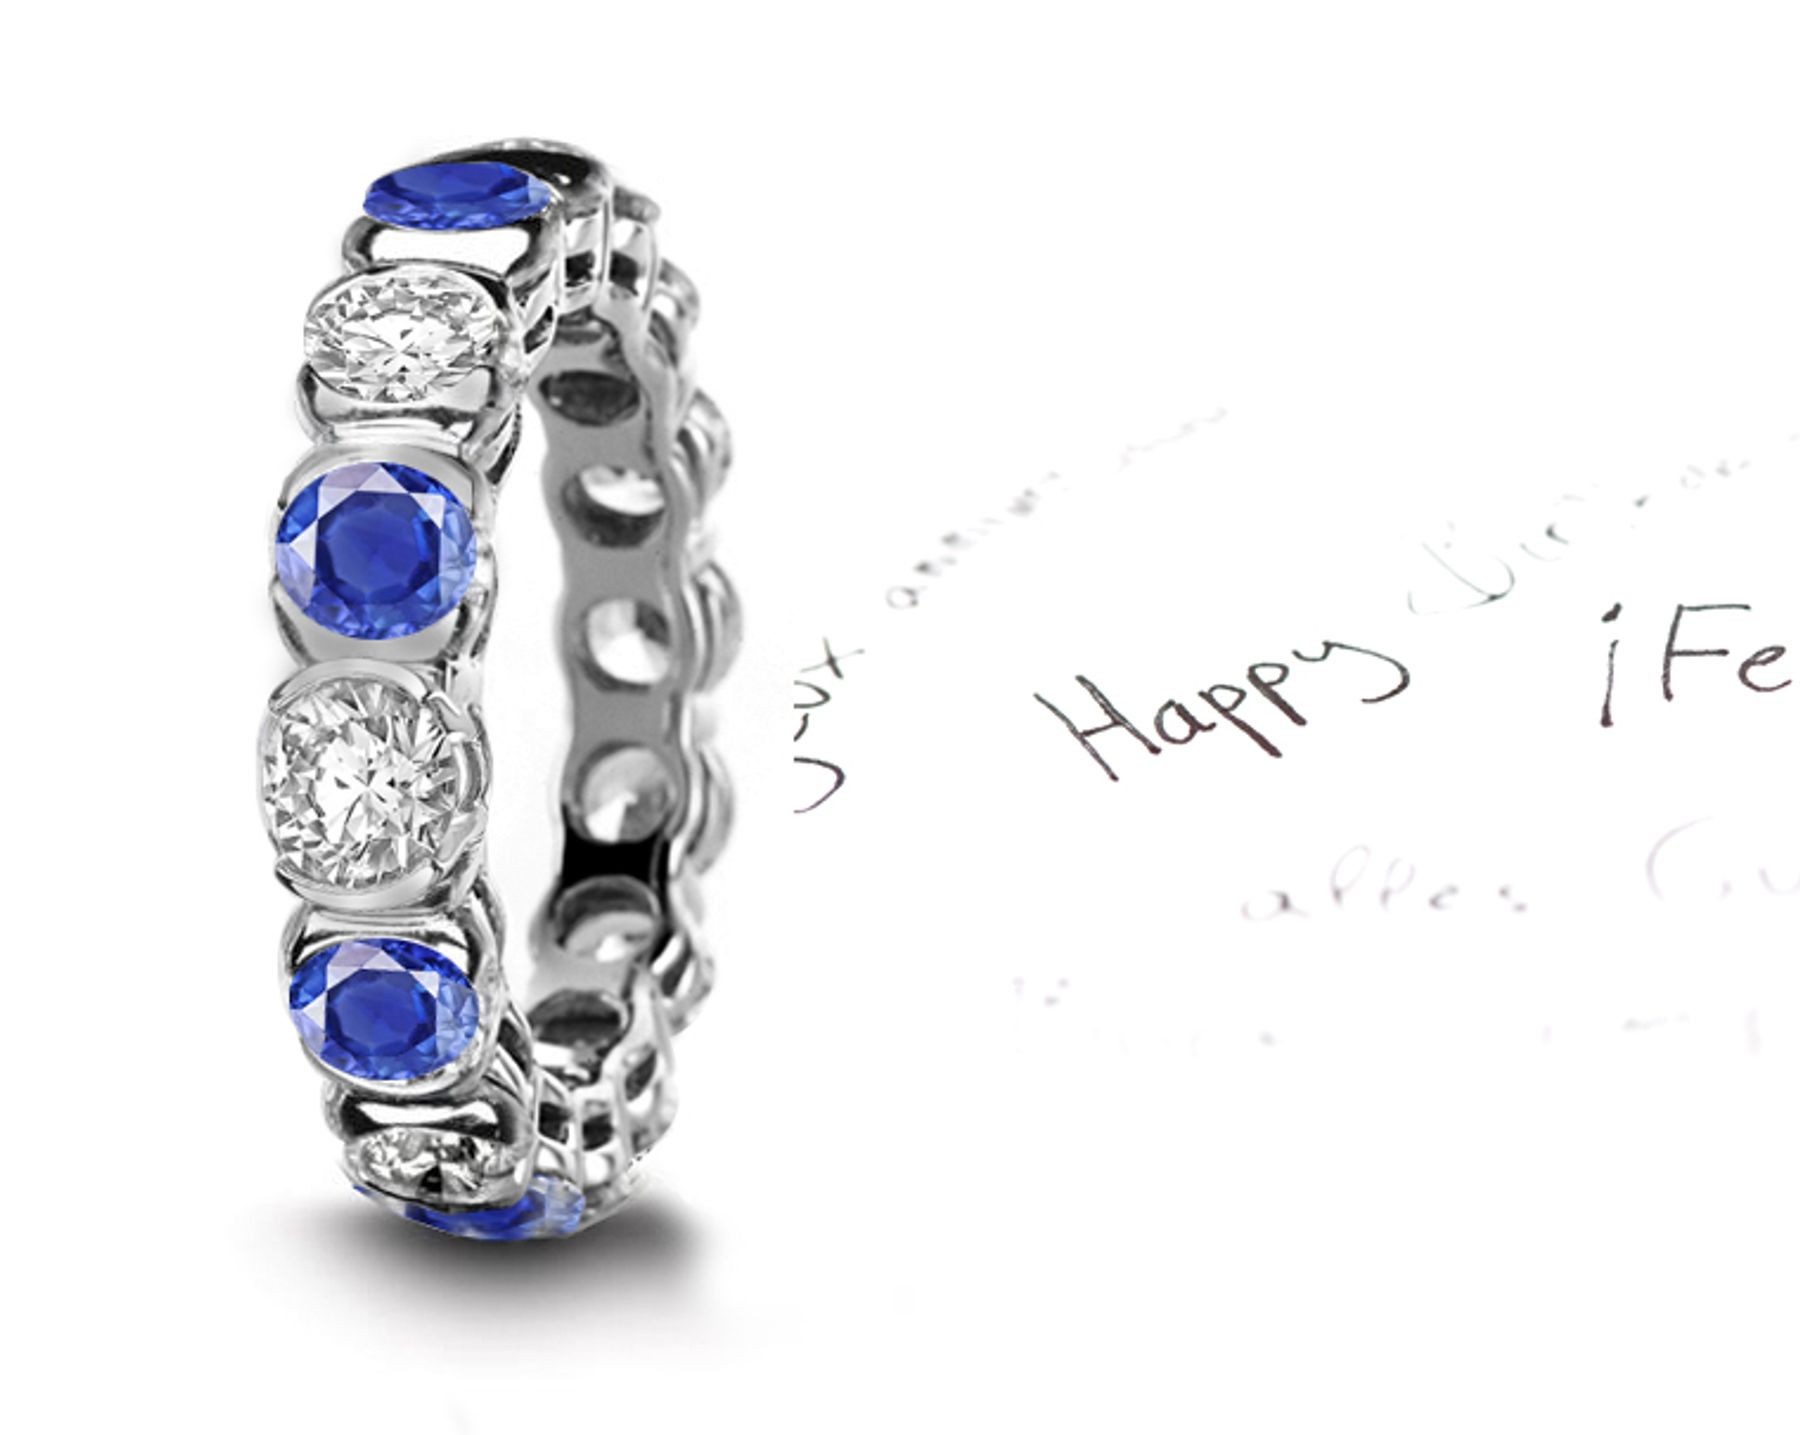 From the Eminent American Jeweler comes this fun and festive band sapphire engagement ring